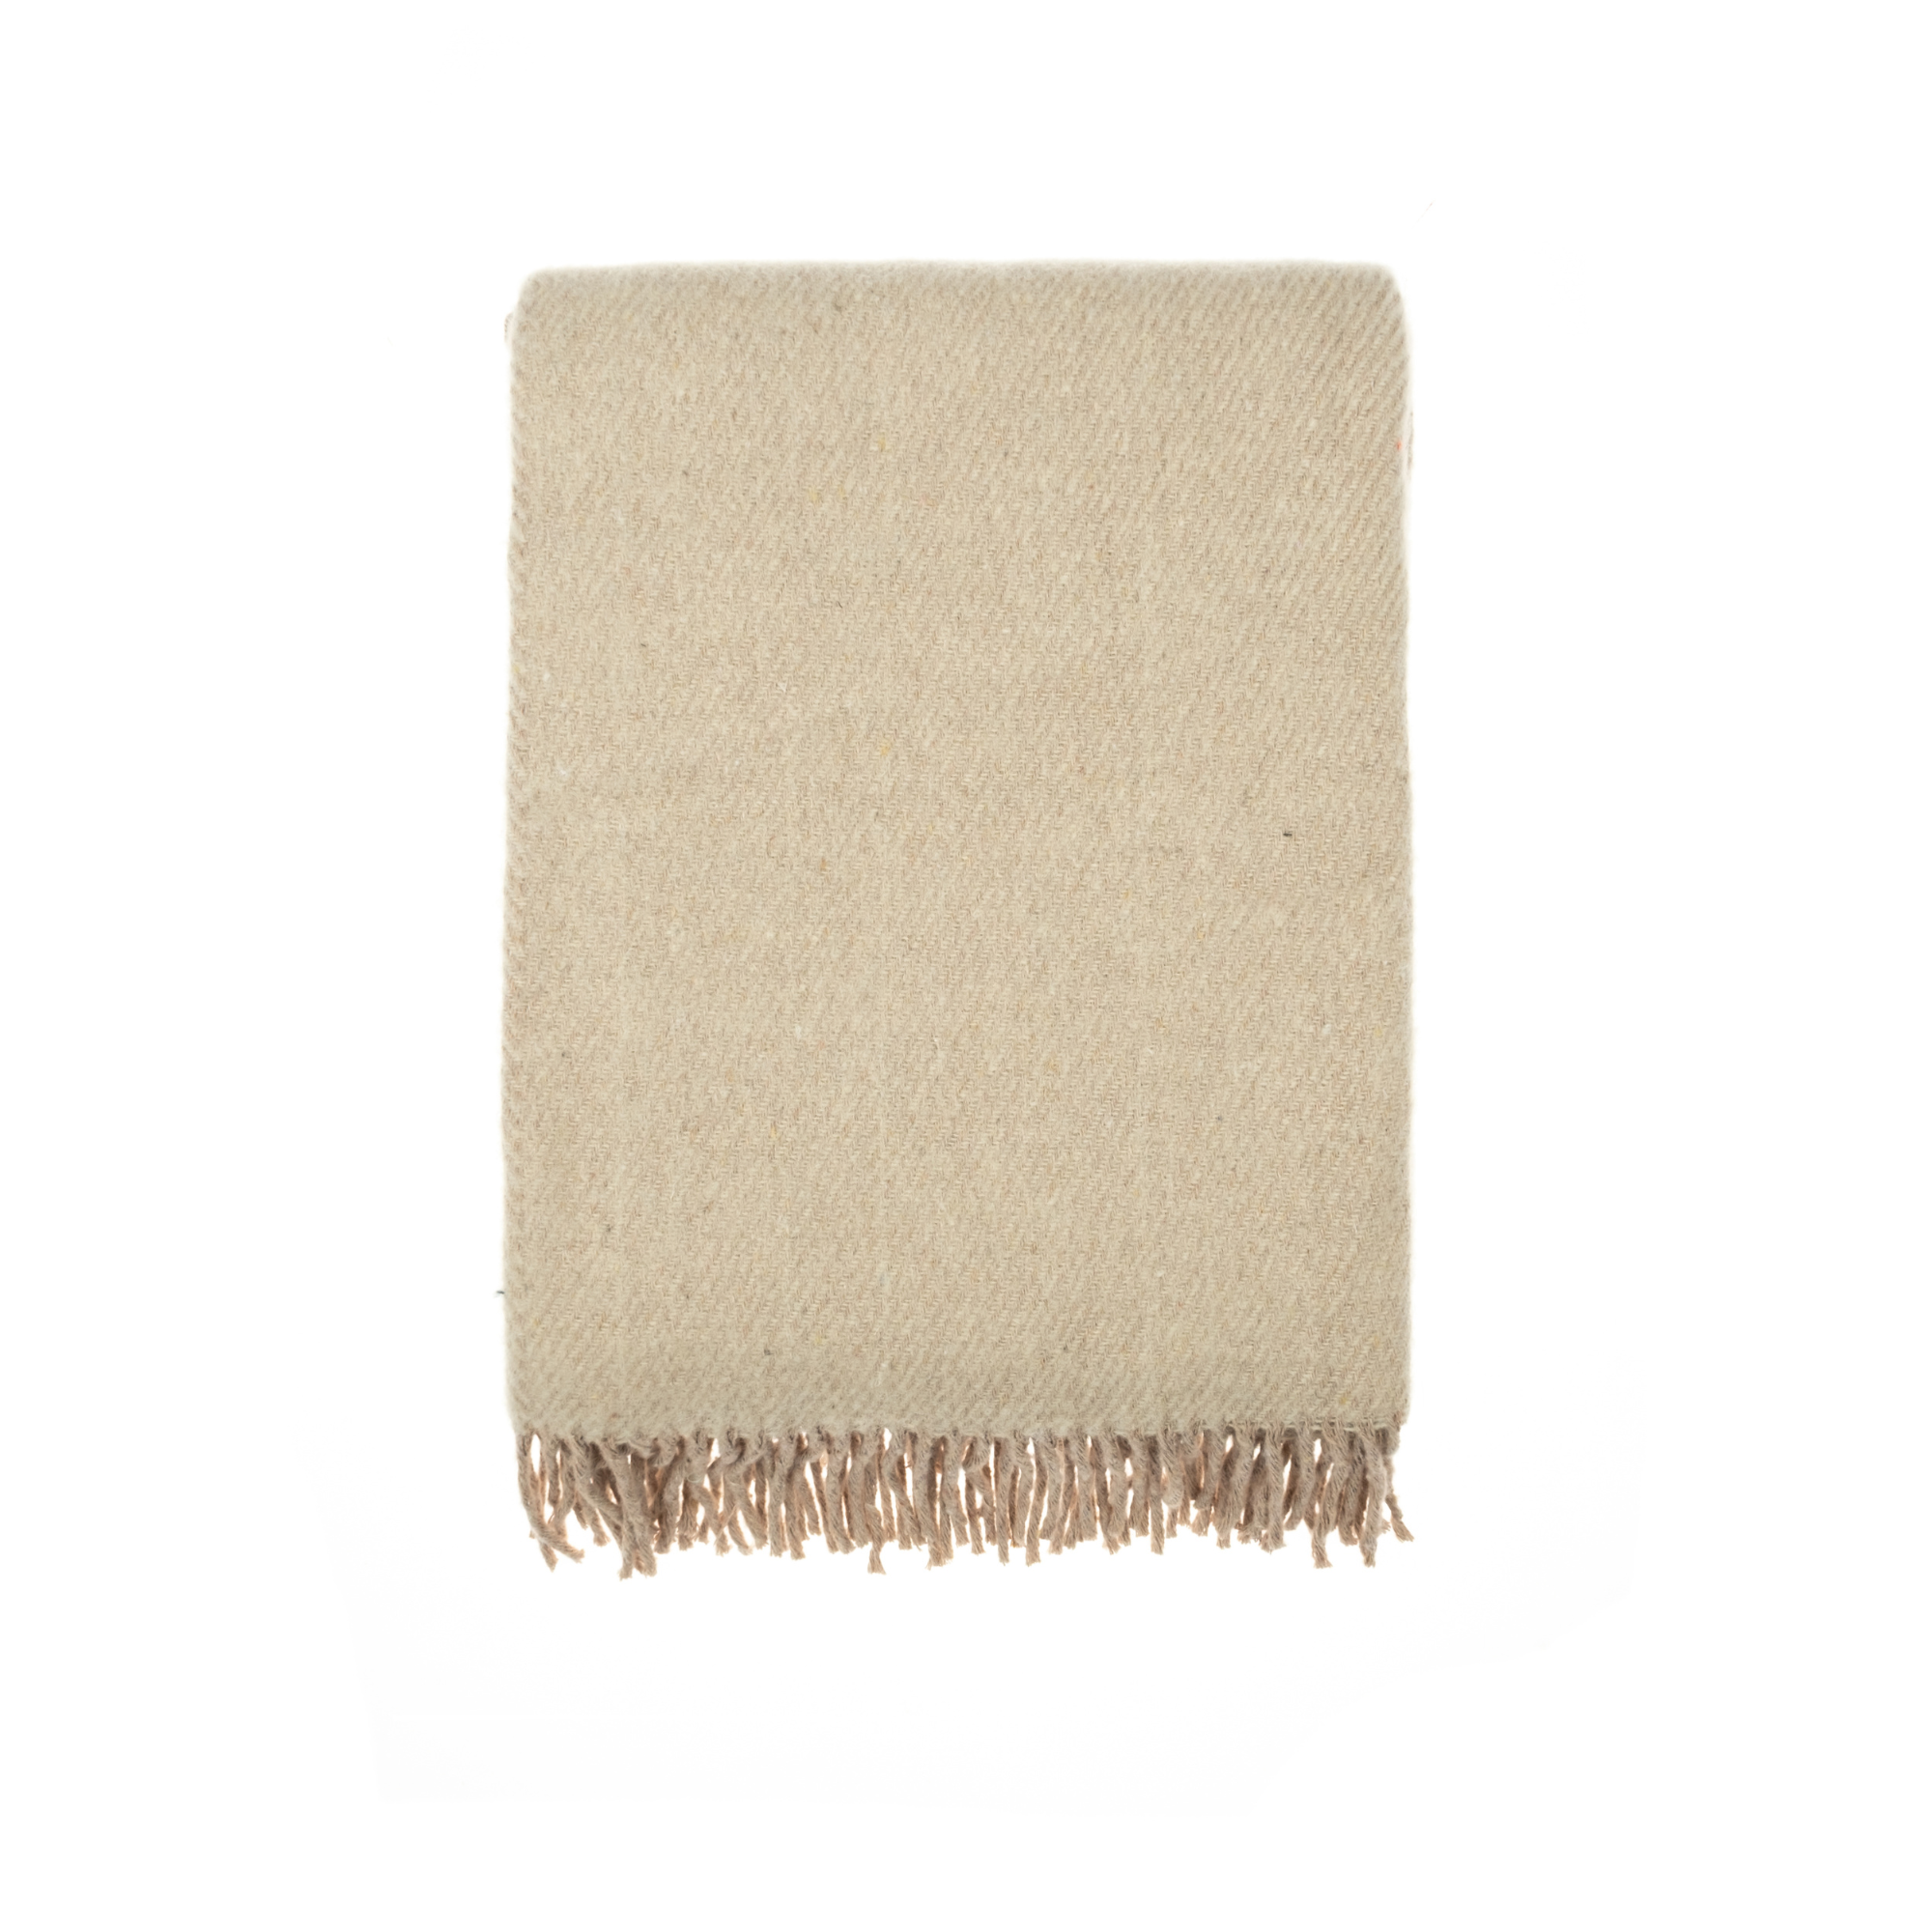 Beige wool blend throw blanket perfect for winter nights